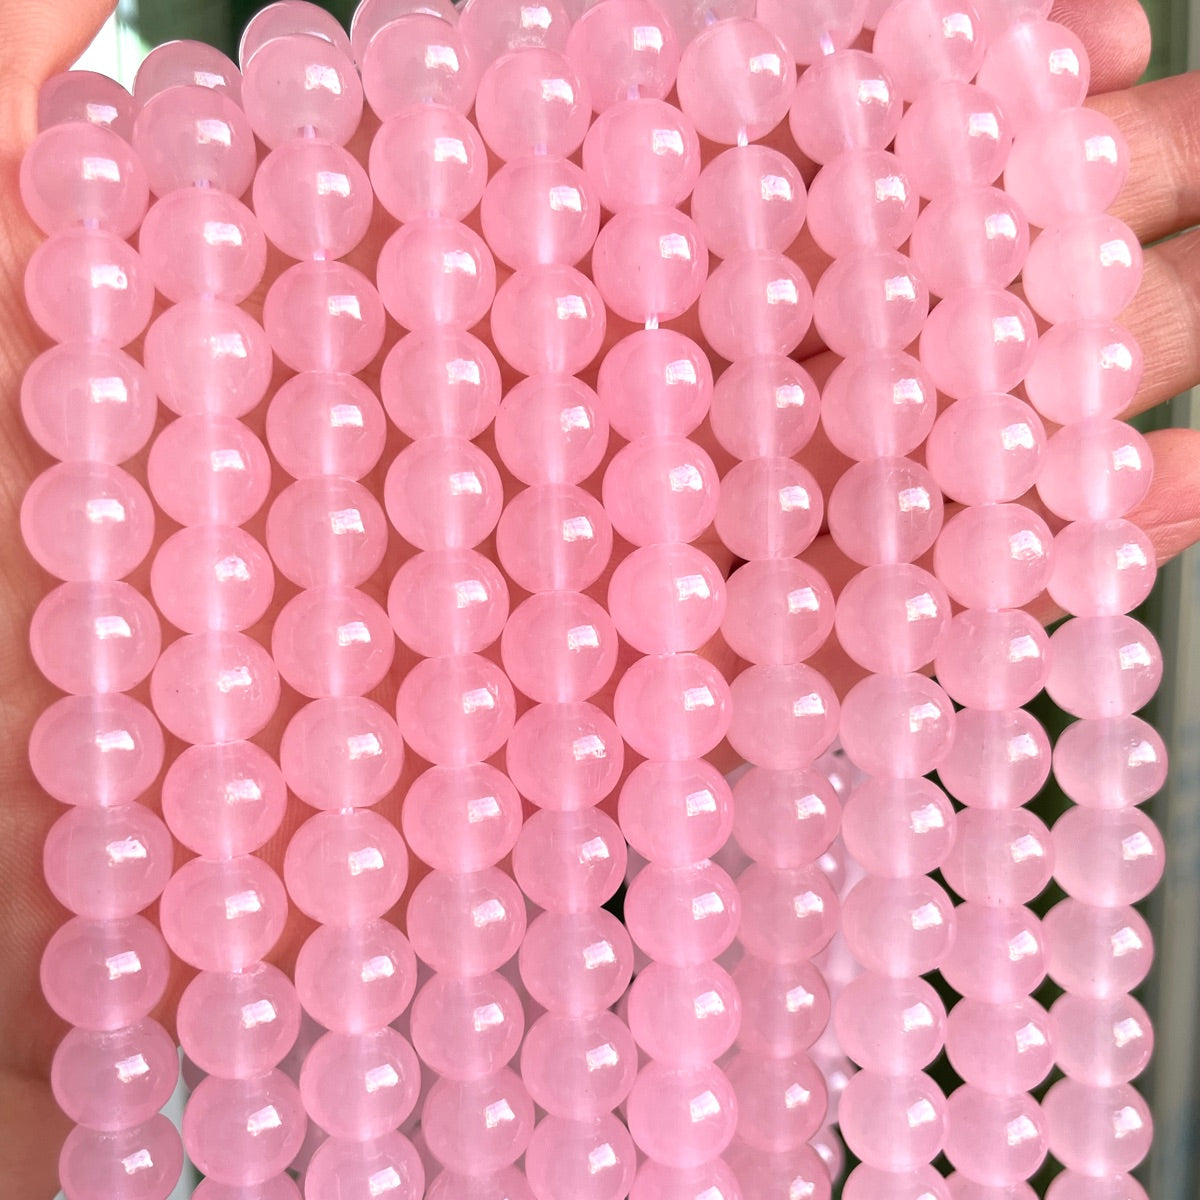 2 Strands/lot 10mm Light Pink Jade Stone Round Beads Stone Beads Breast Cancer Awareness New Beads Arrivals Round Jade Beads Charms Beads Beyond